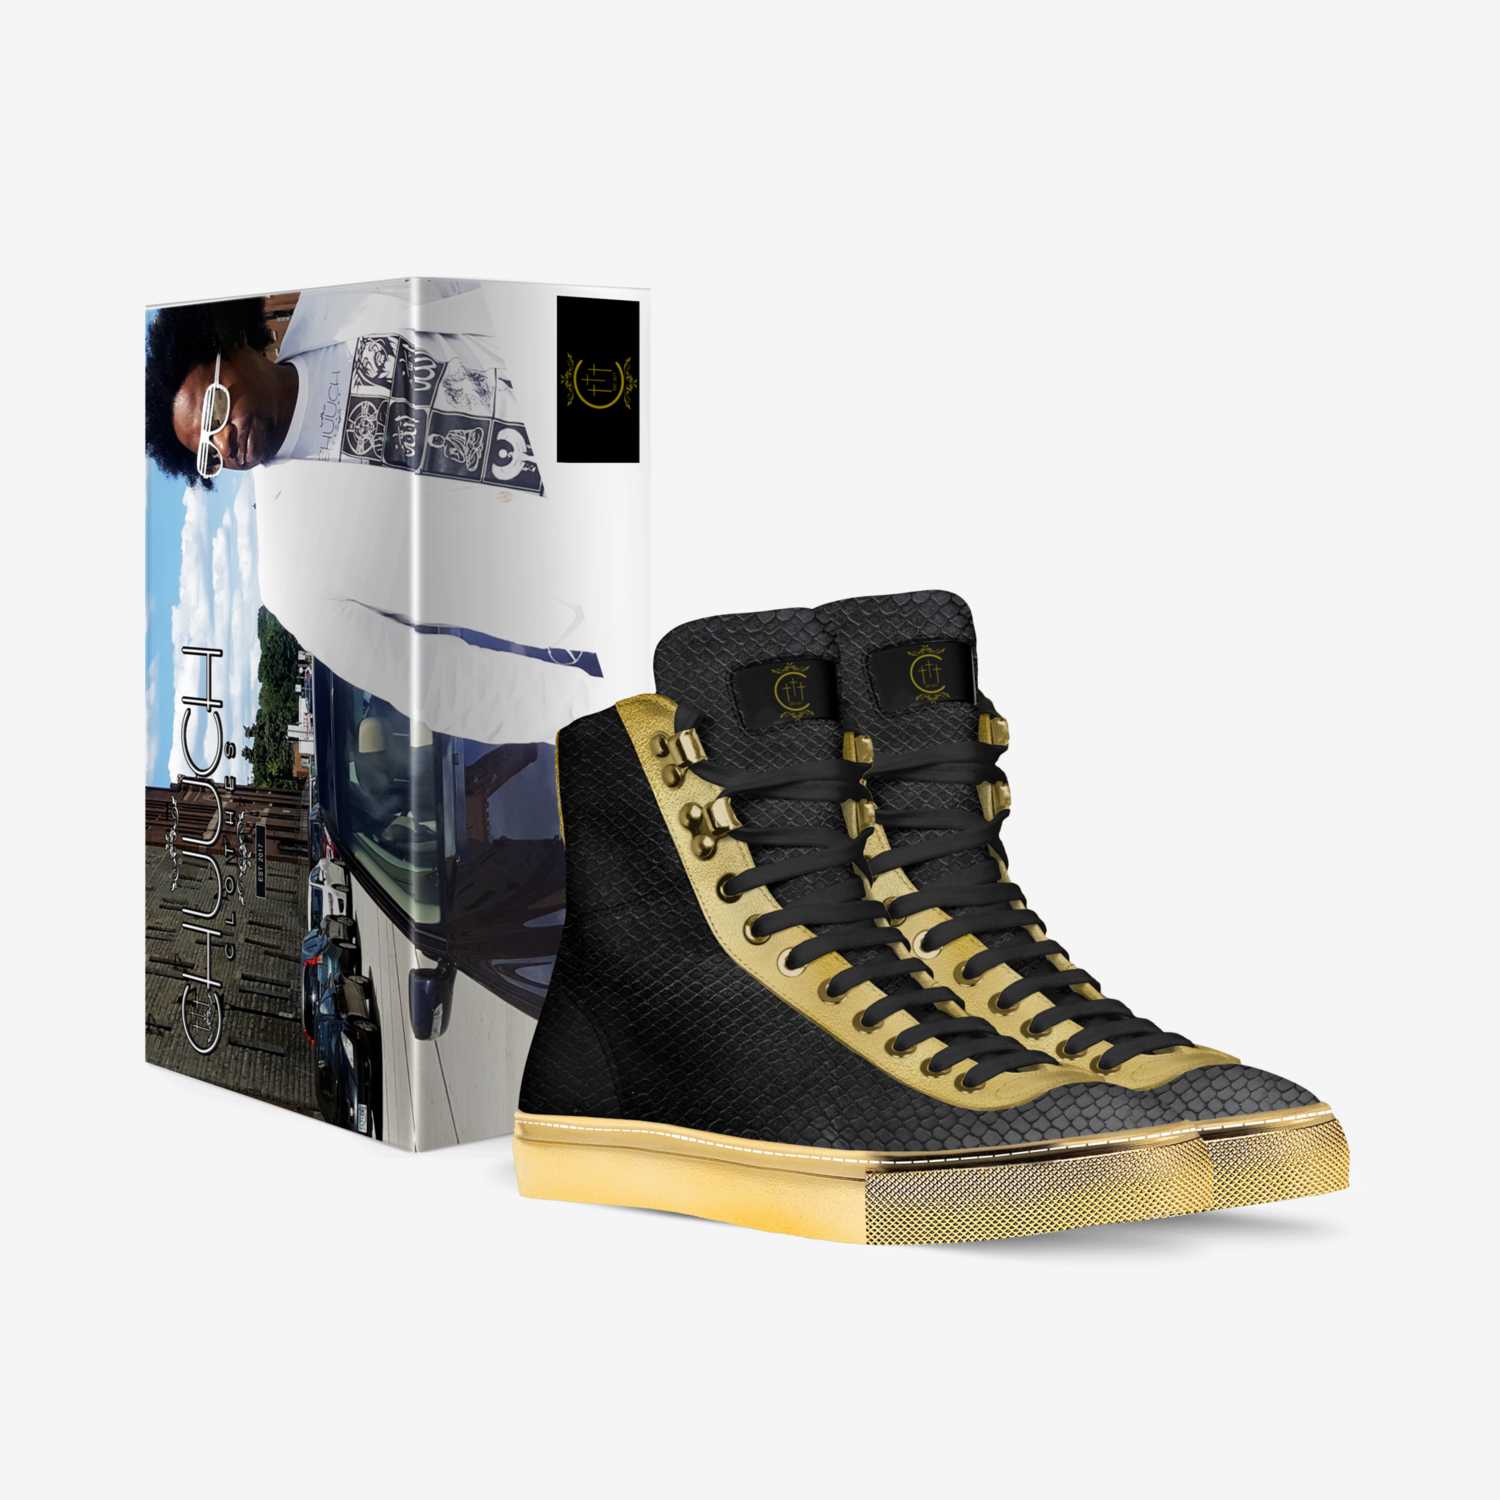 CHUUCH LUX custom made in Italy shoes by James Porter Iii | Box view